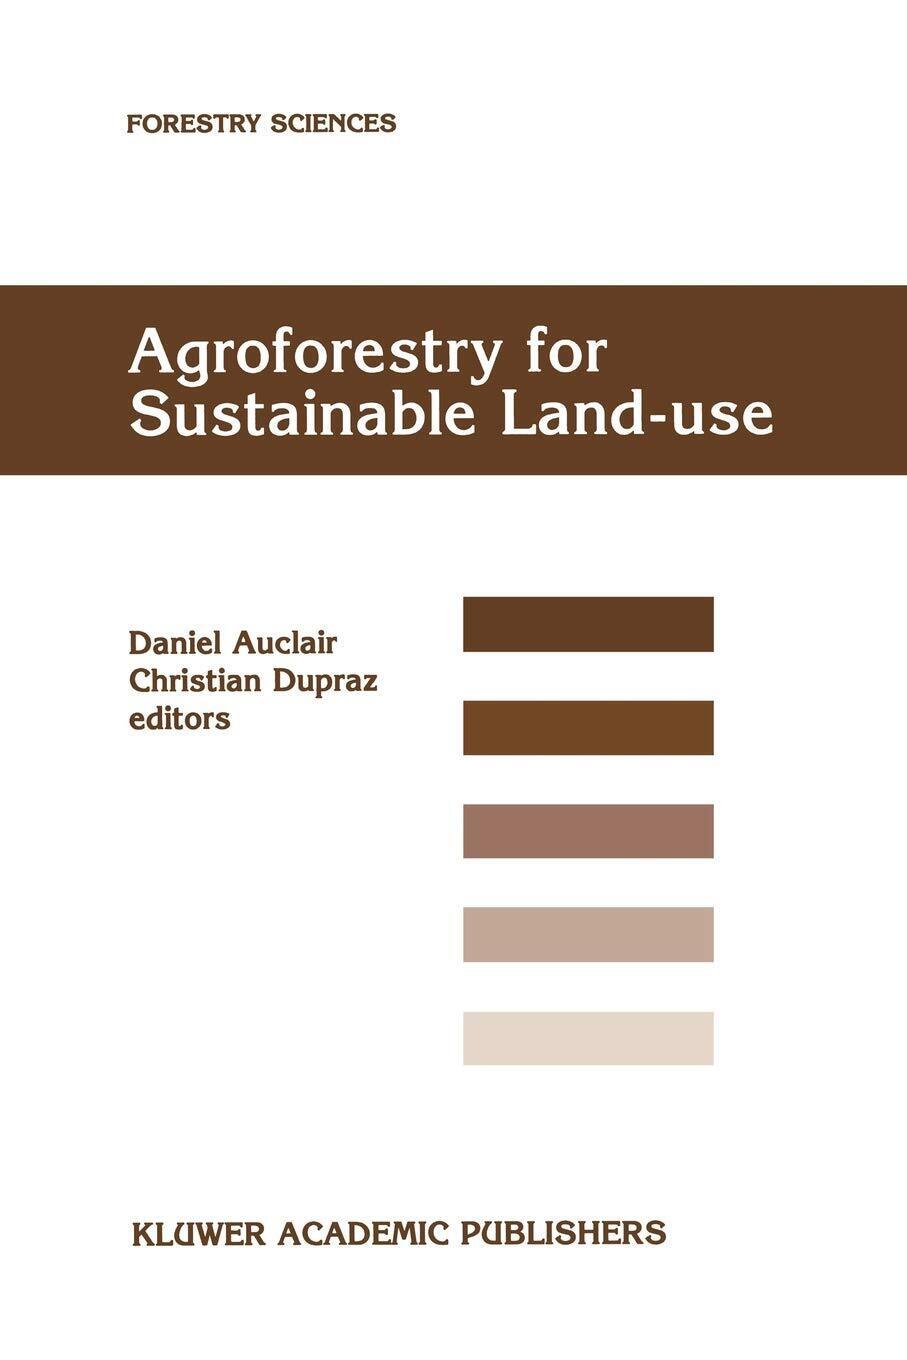 Agroforestry for Sustainable Land-use - Daniel Auclair - Springer, 2010 libro usato